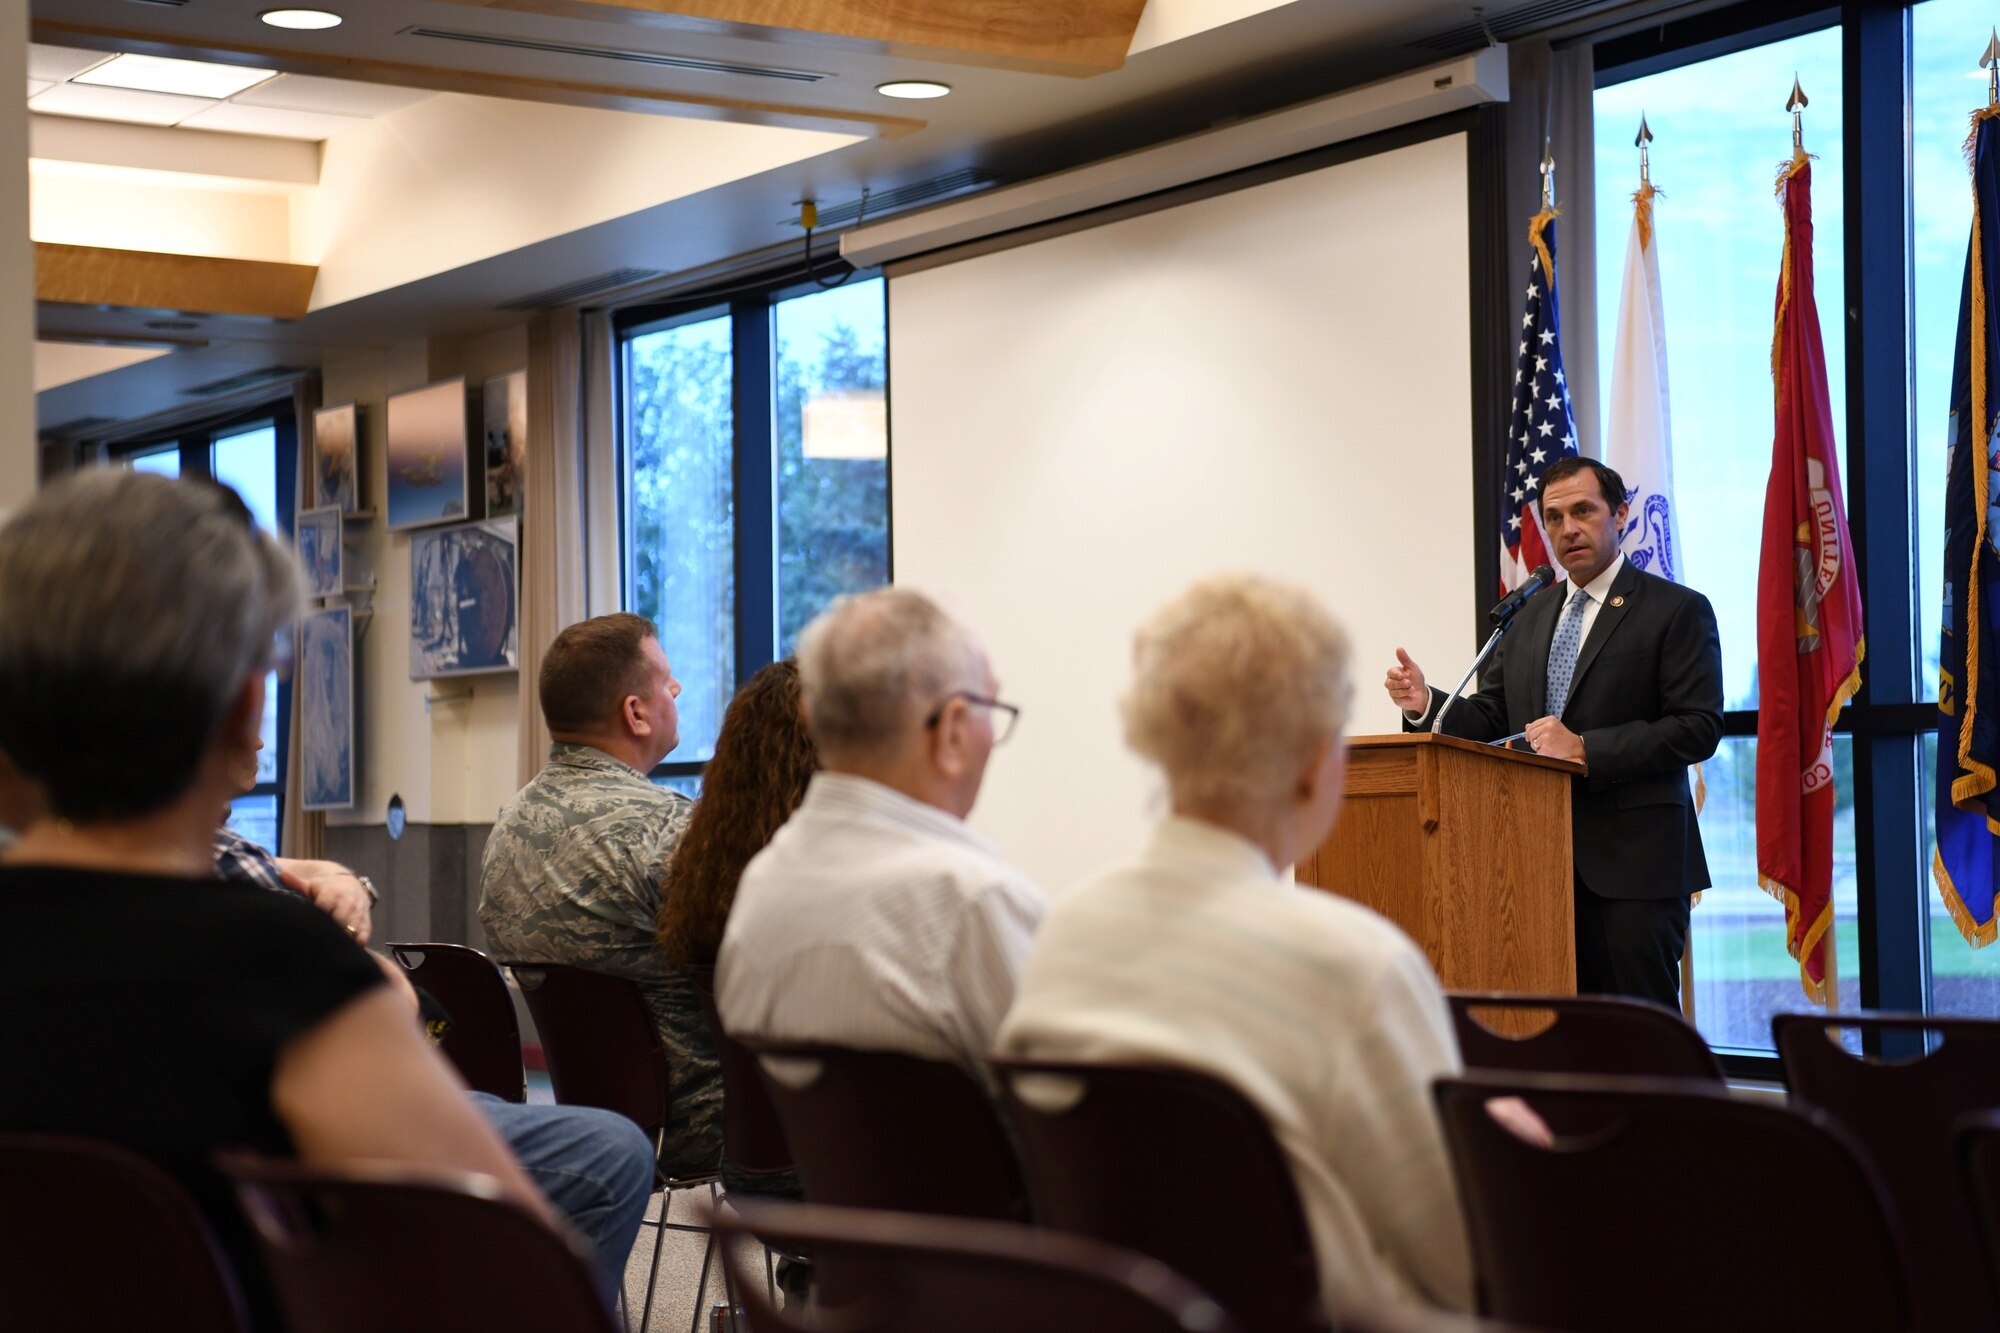 Congressman Jason Crow, 6th District of Colorado Representative, speaks with retirees, July 27, 2019, on Buckley Air Force Base, Colo. Crow emphasized democracy is not inevitable and must be fought for by every generation and that we owe a debt to those who have served. (U.S. Air Force photo by Airman 1st Class Michael D. Mathews)